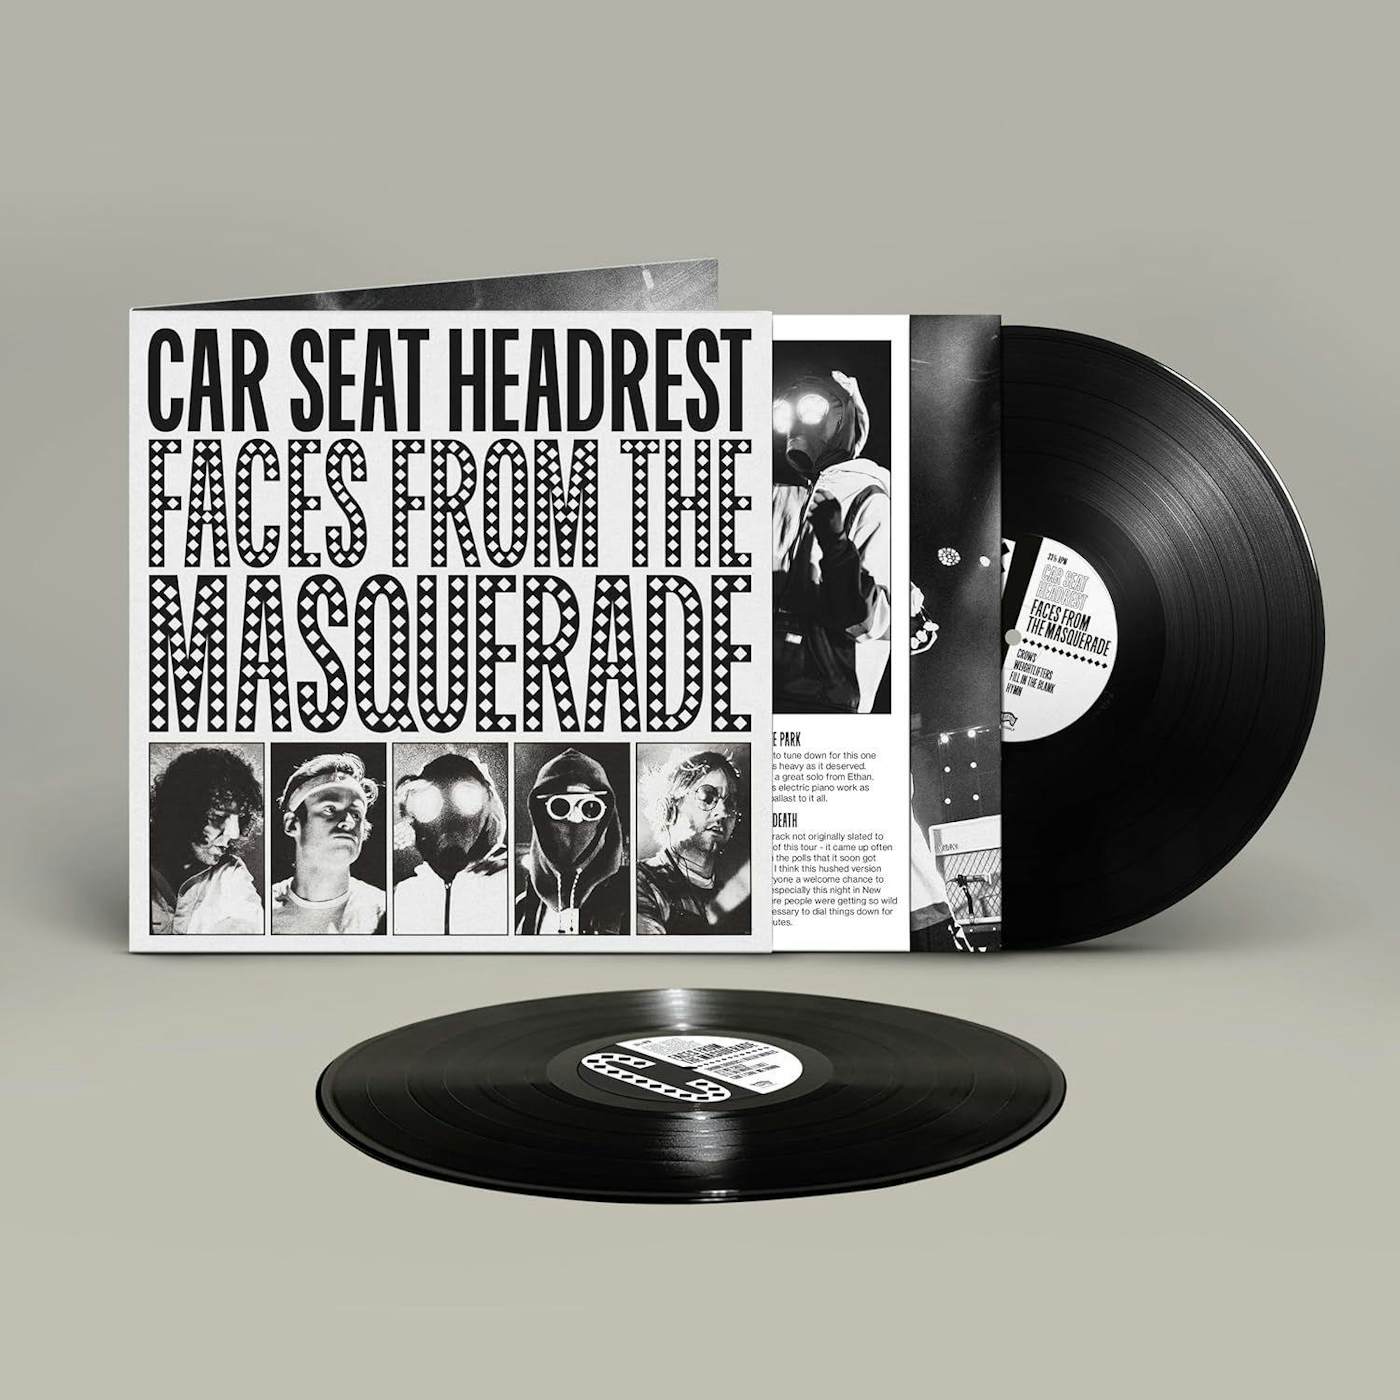 Car Seat Headrest Faces From The Masquerade (2LP) Vinyl Record